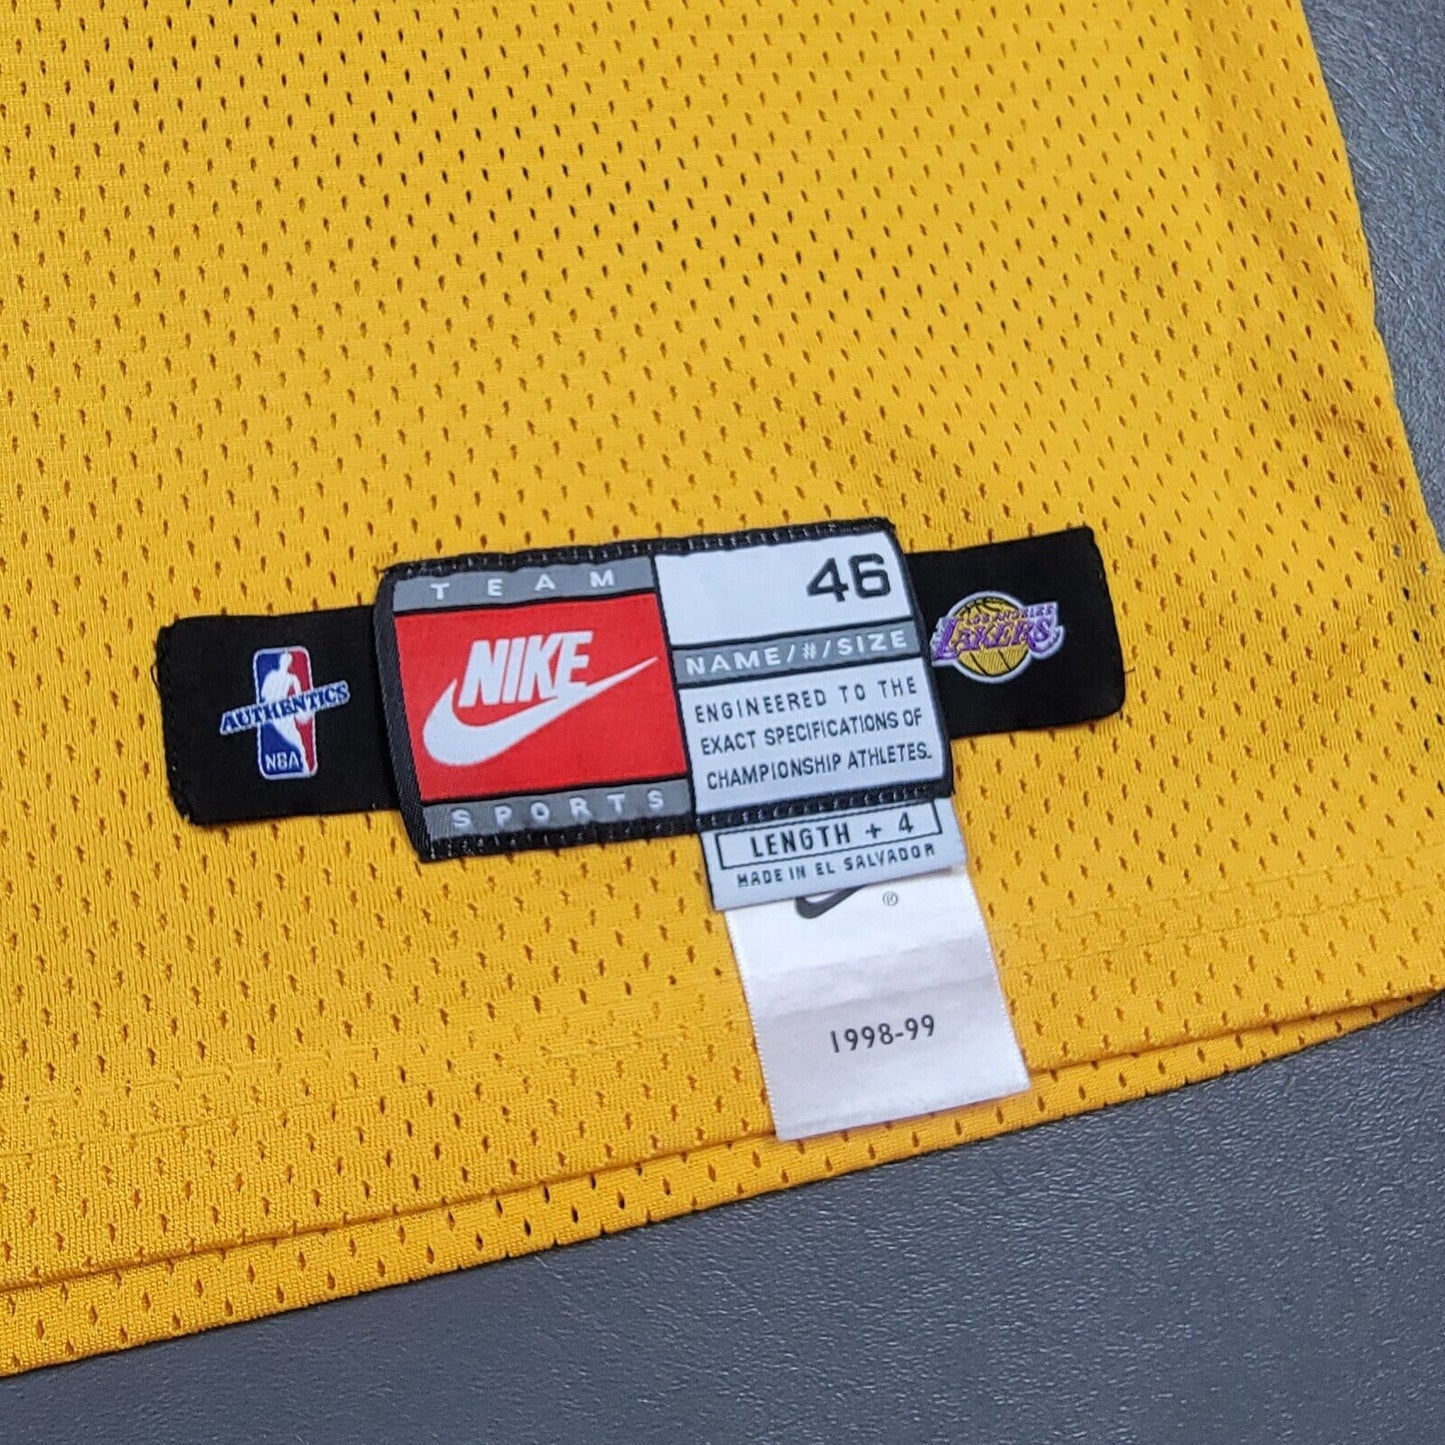 100% Authentic Kobe Bryant Nike 98 99 Los Angeles Lakers Pro Cut Jersey 46+4"